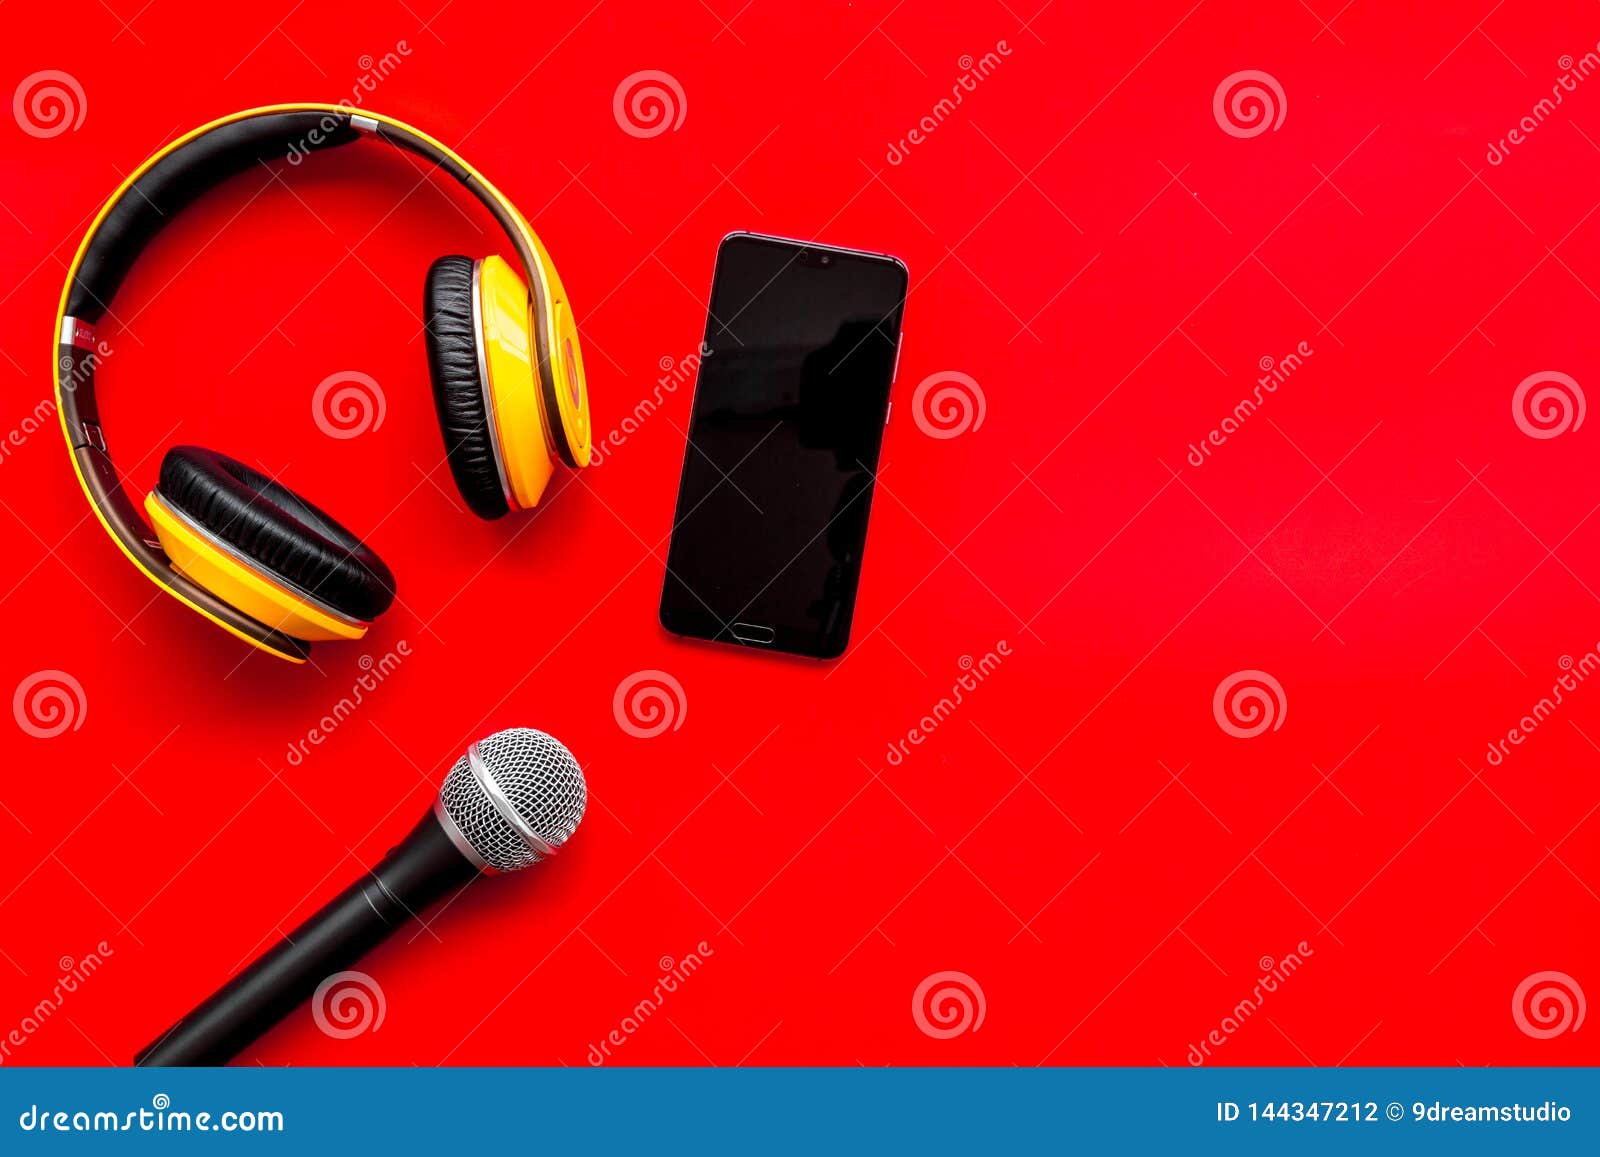 Download Microphone, Headphones, Mobile For Blogger, Journalist Or ...